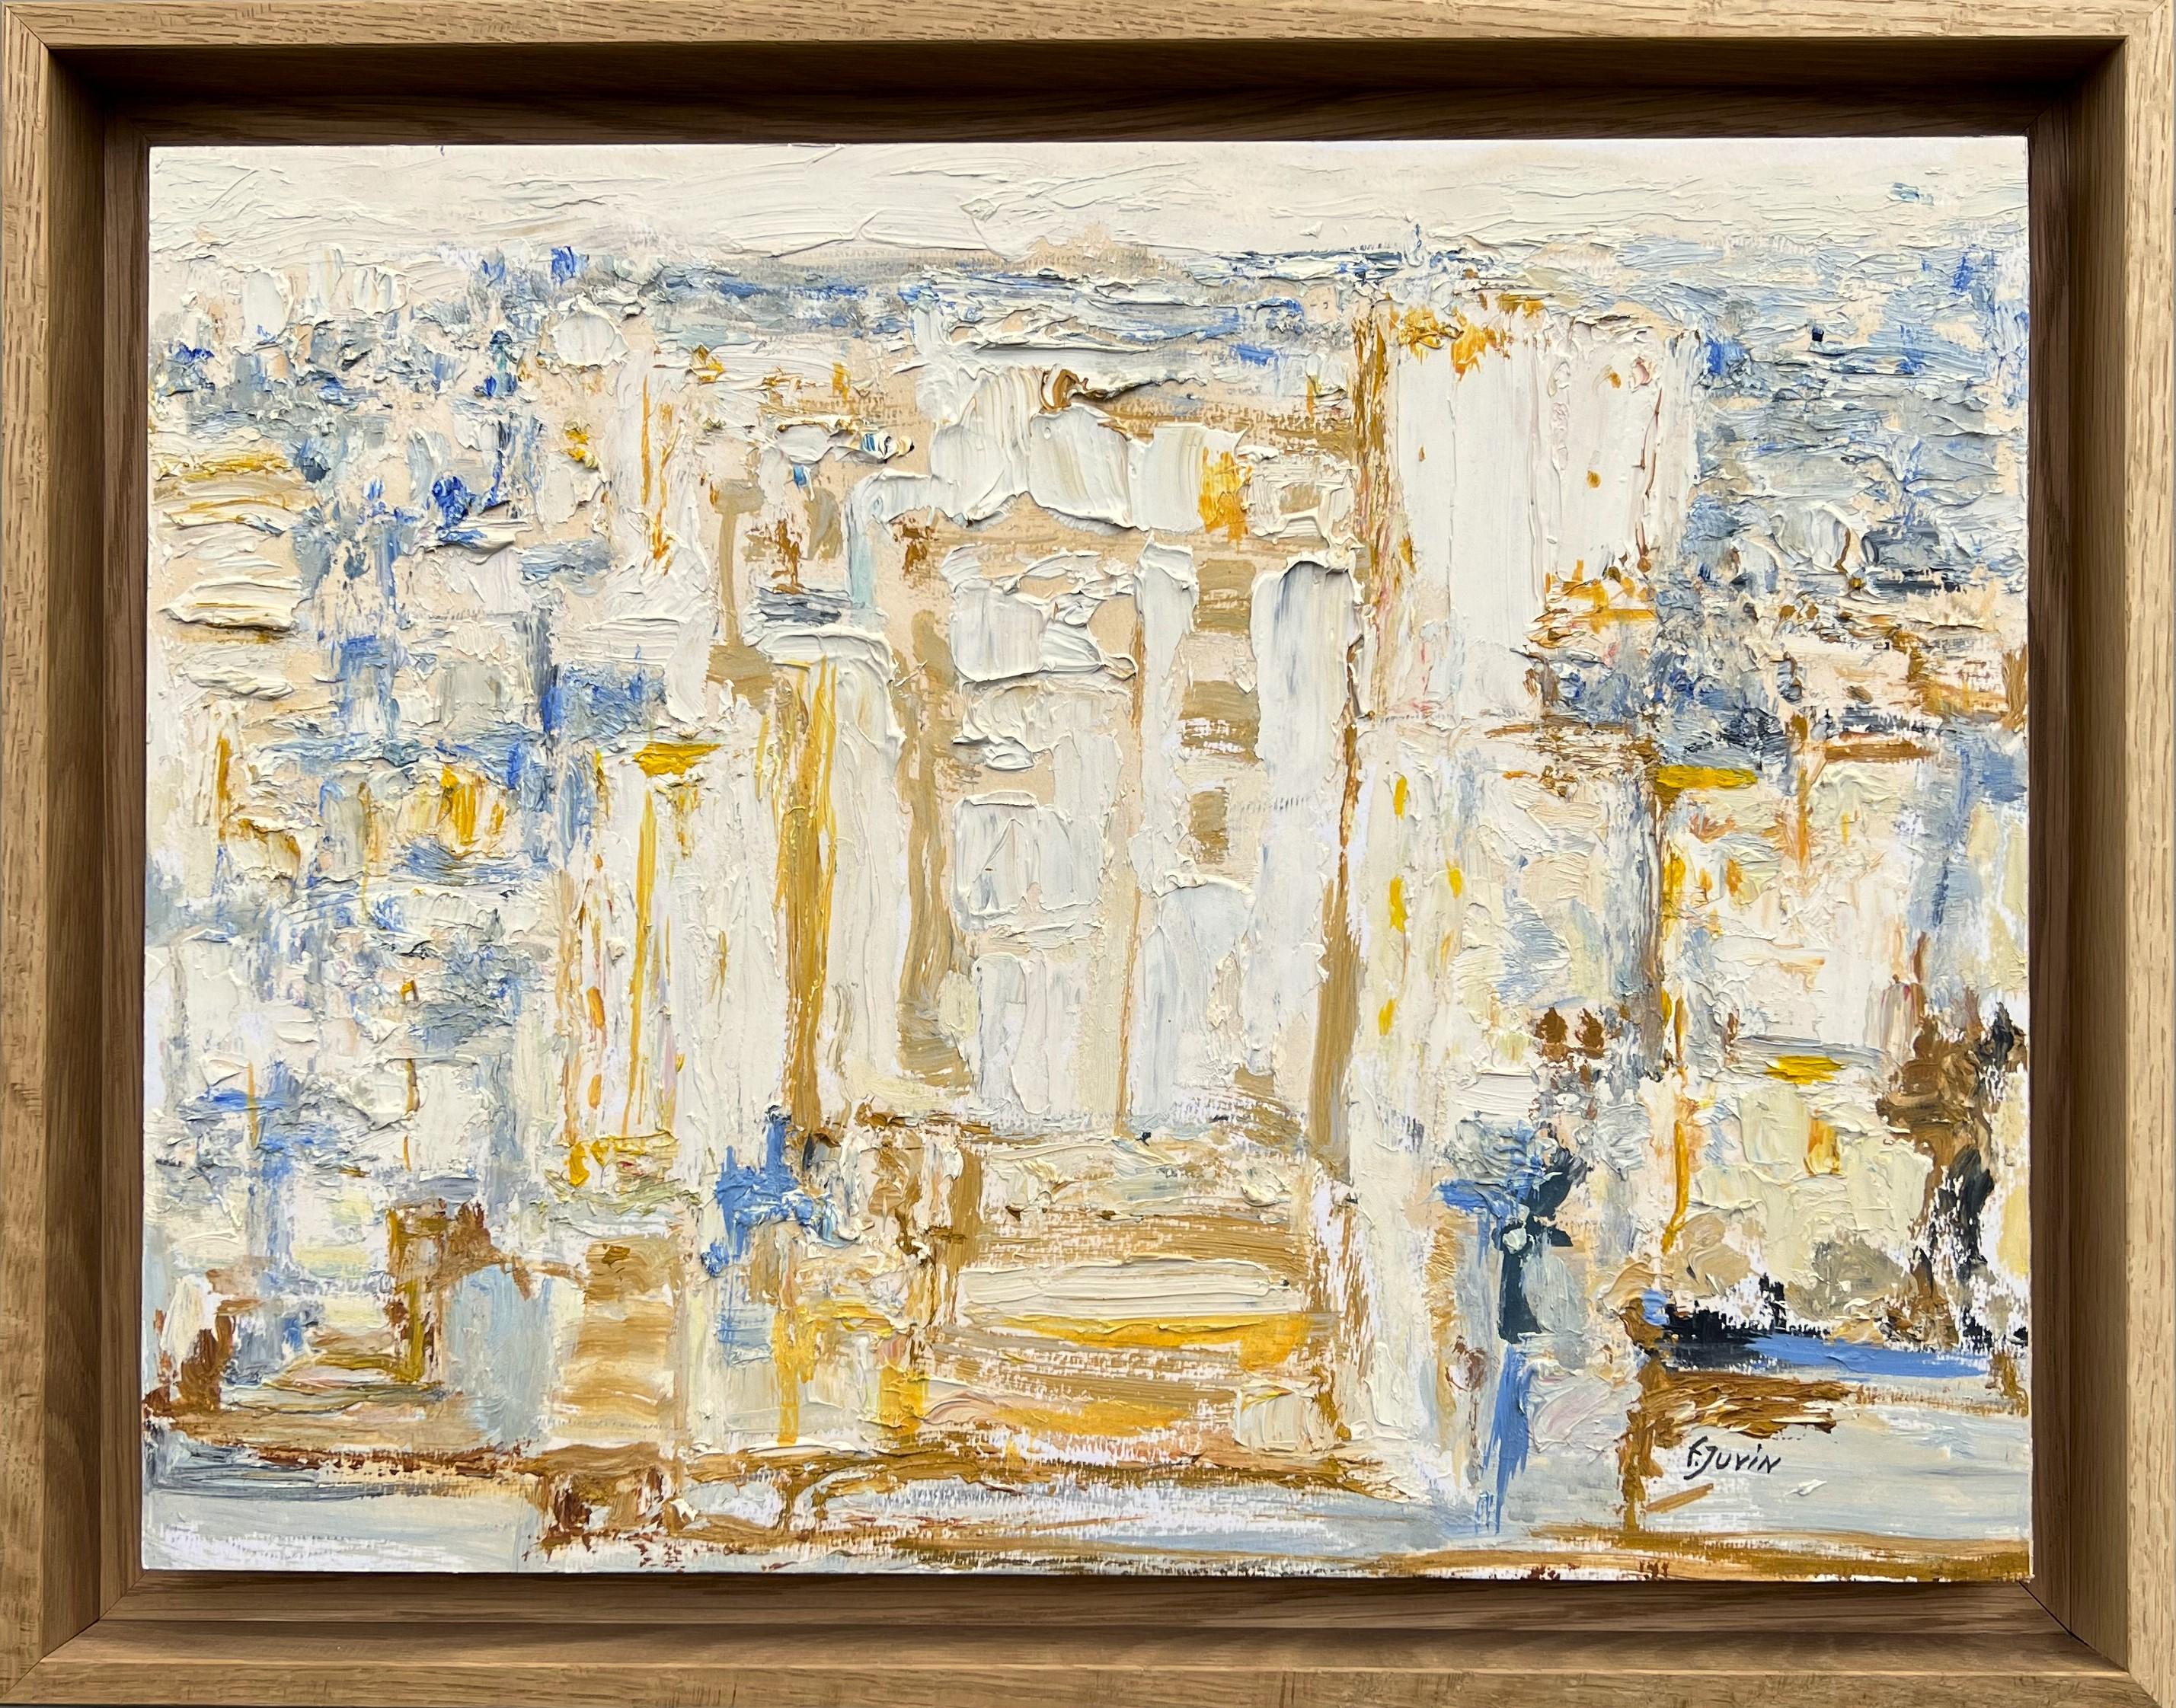 Françoise Juvin - View of Paris with buildings
Reference number FJ74
Framed with a natural oak floated frame.
32,5 x 41 cm frame included (28x 37 cm without frame)
This work is painted with oil on a paper that is mounted on a board and placed in a